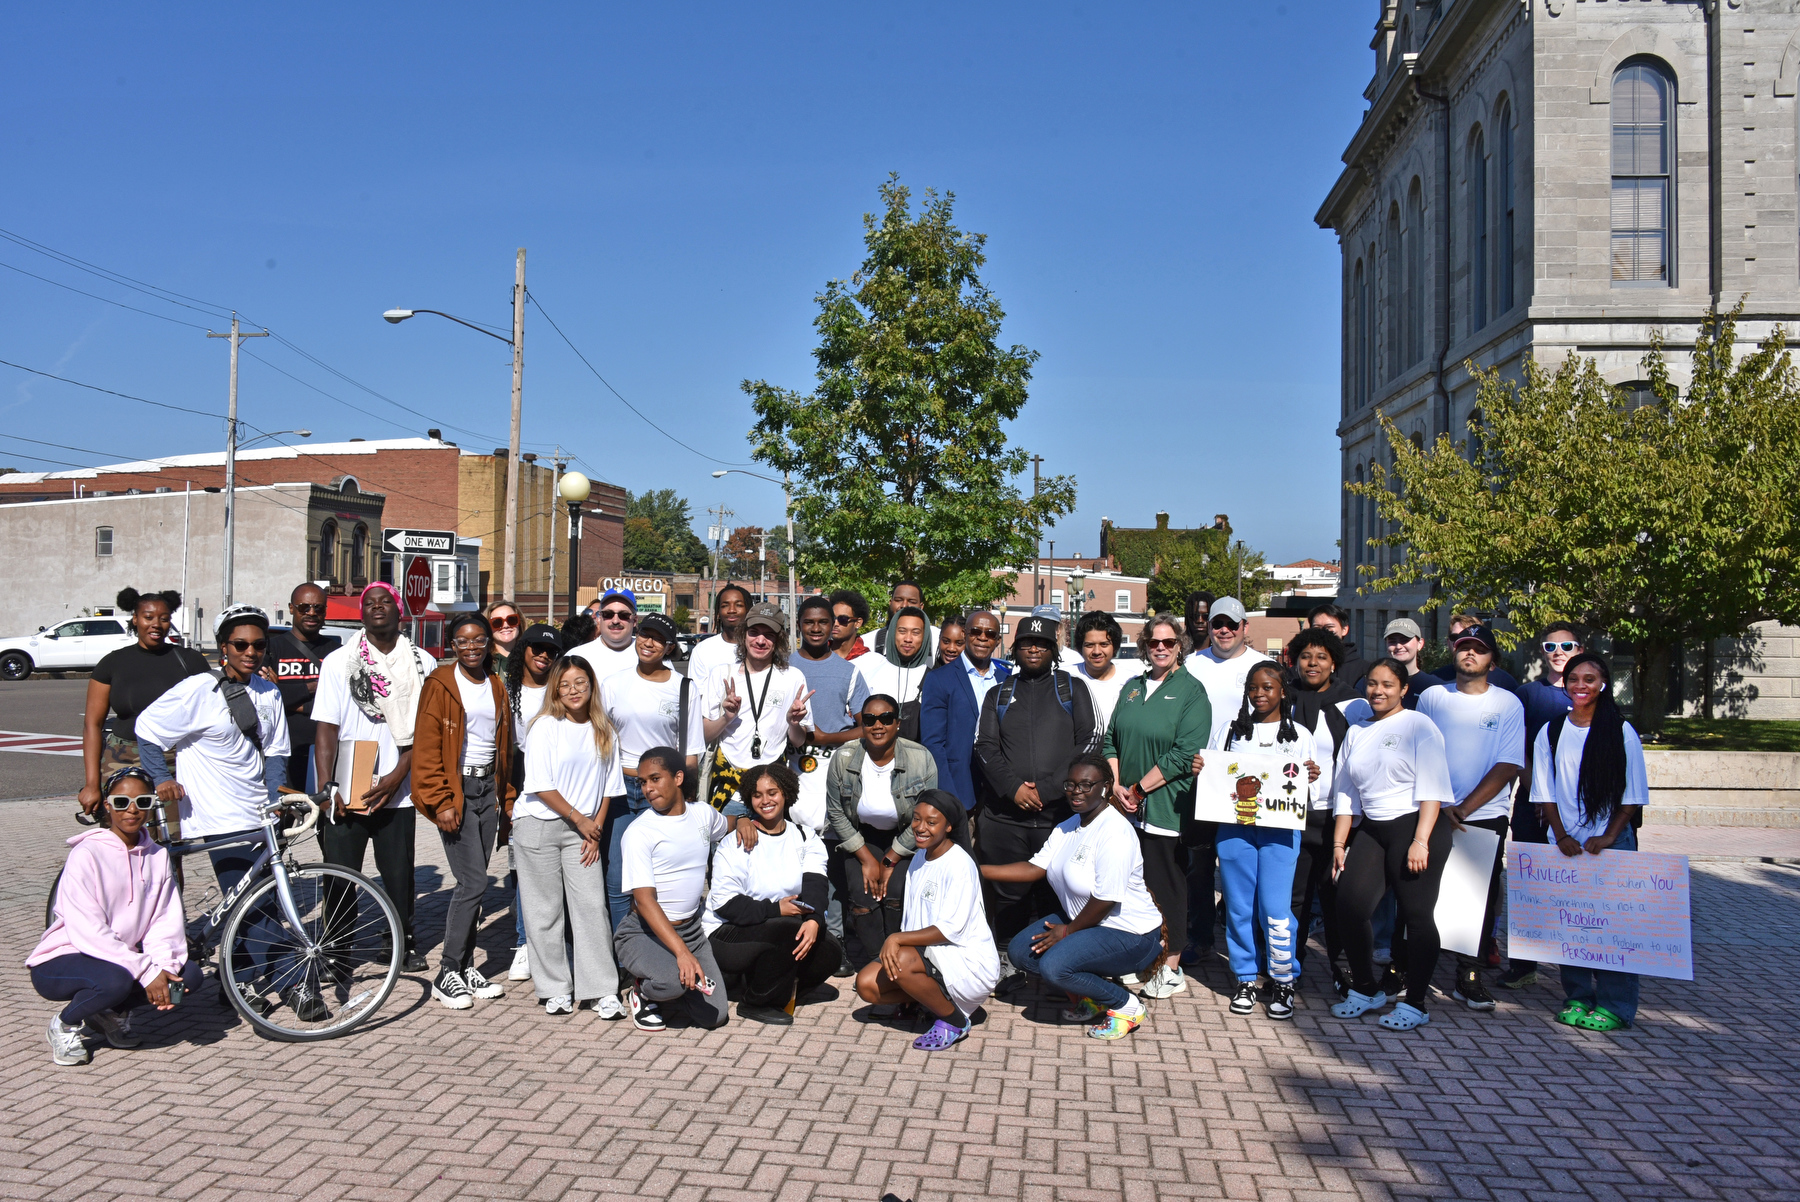 Students, faculty, staff and President Peter O. Nwosu participated in the annual ALANA Peace Walk Oct. 1, which began with speakers at Oswego City Hall and ended at the SUNY Oswego Marano Campus Center. Part of the 37th ALANA Multicultural Leadership Conference, the event is sponsored by Black Student Union and Student Engagement and Leadership.